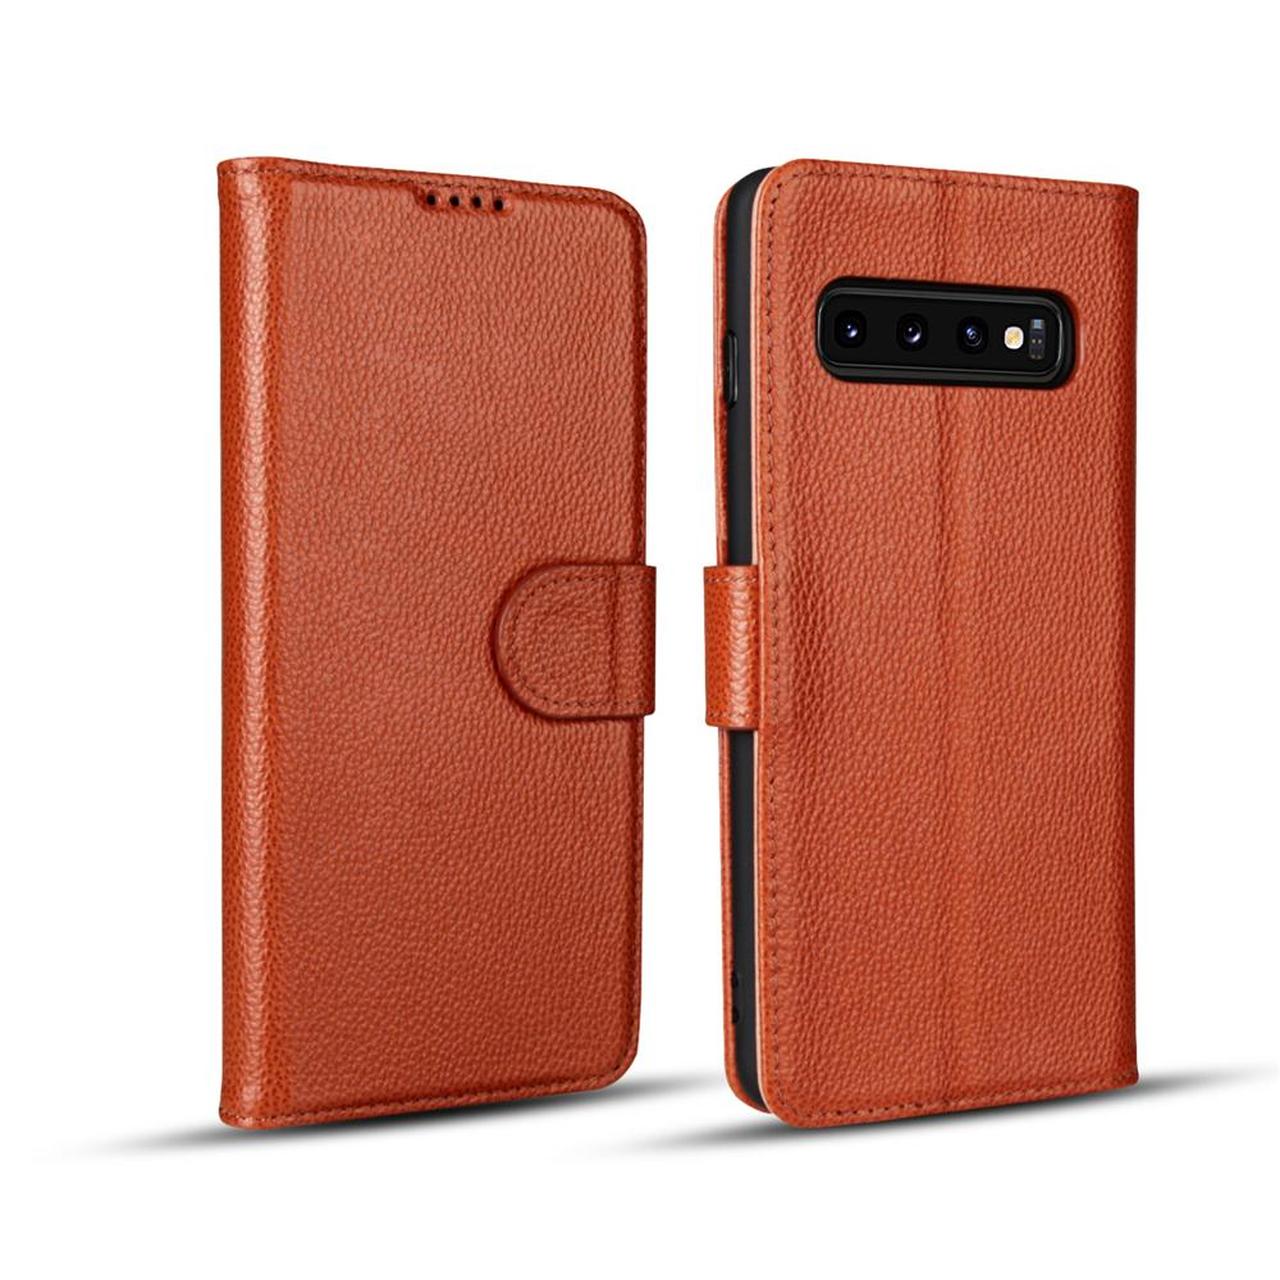 Samsung Galaxy S10 Case Brown Fashion Cowhide Genuine Leather Flip Cover with 2 Card Slots, 1 Cash Slot & Shockproof